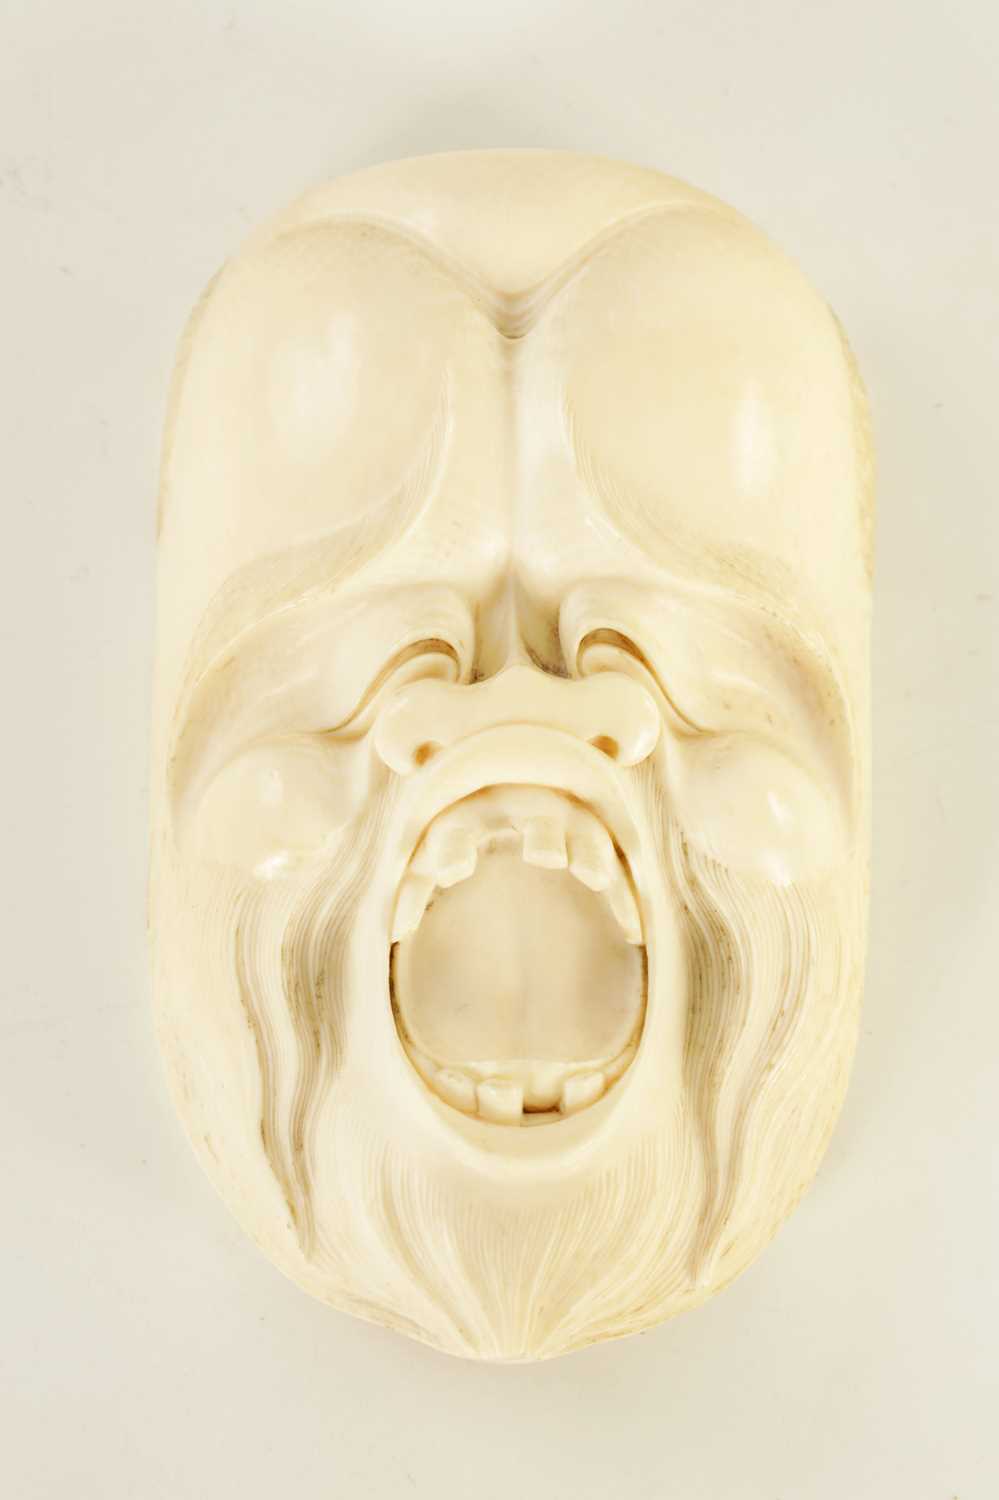 Lot 120 - A JAPANESE MEIJI PERIOD CARVED IVORY GROTESQUE FACE MARK